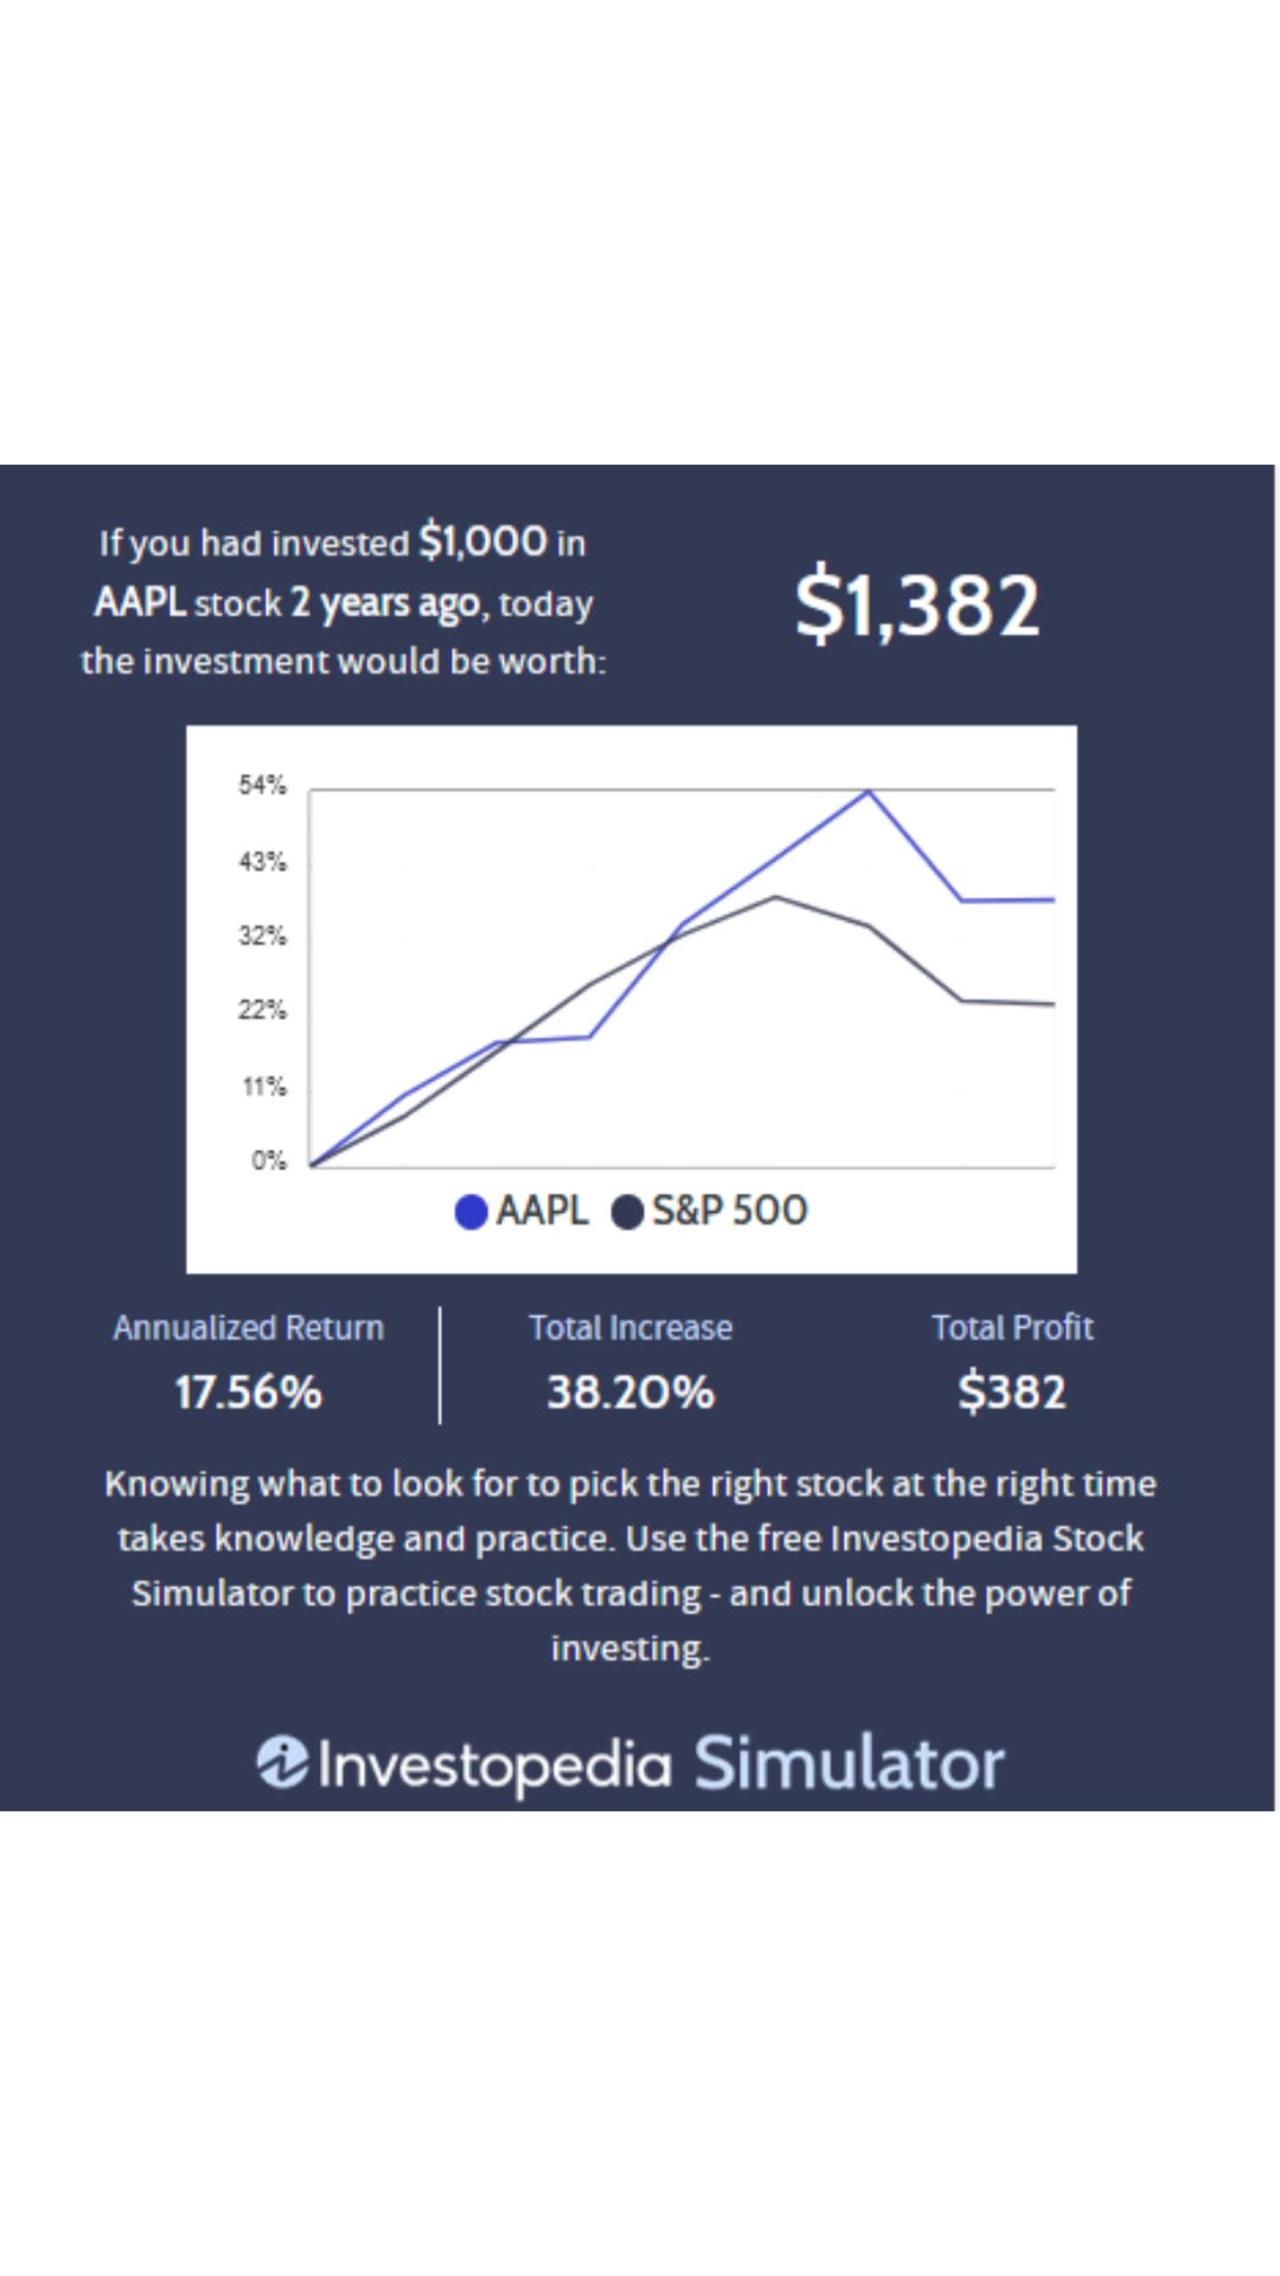 What would have happened if you invested in Apple stock?